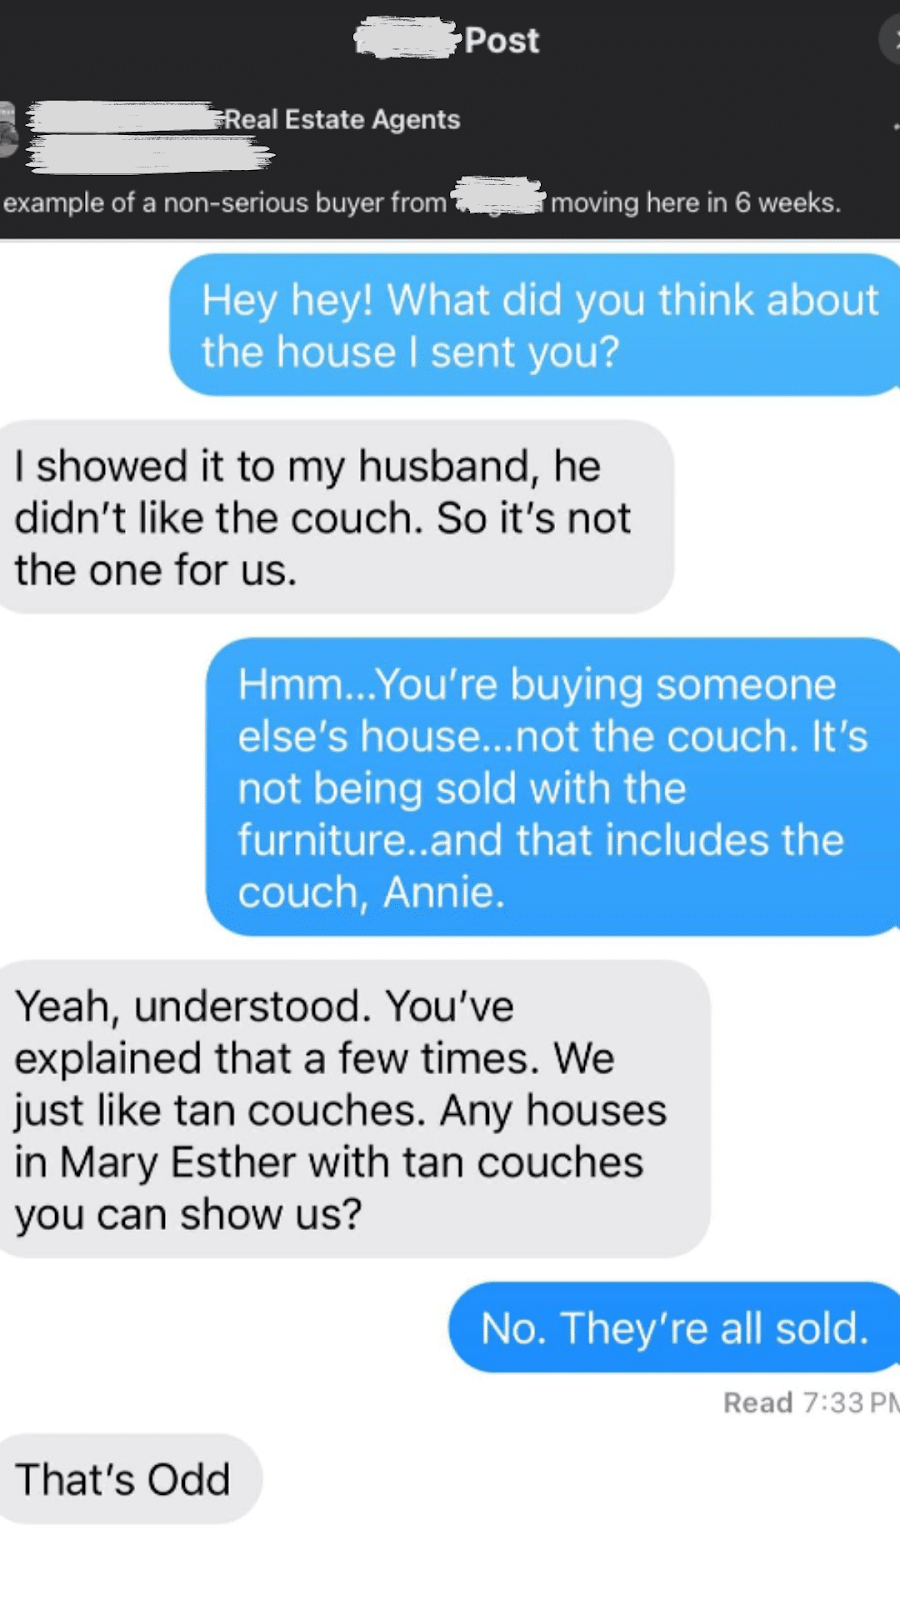  Screenshot of a text conversation between a real estate agent and a buyer client that discusses why the buyers aren't interested in a house without a tan couch in it.